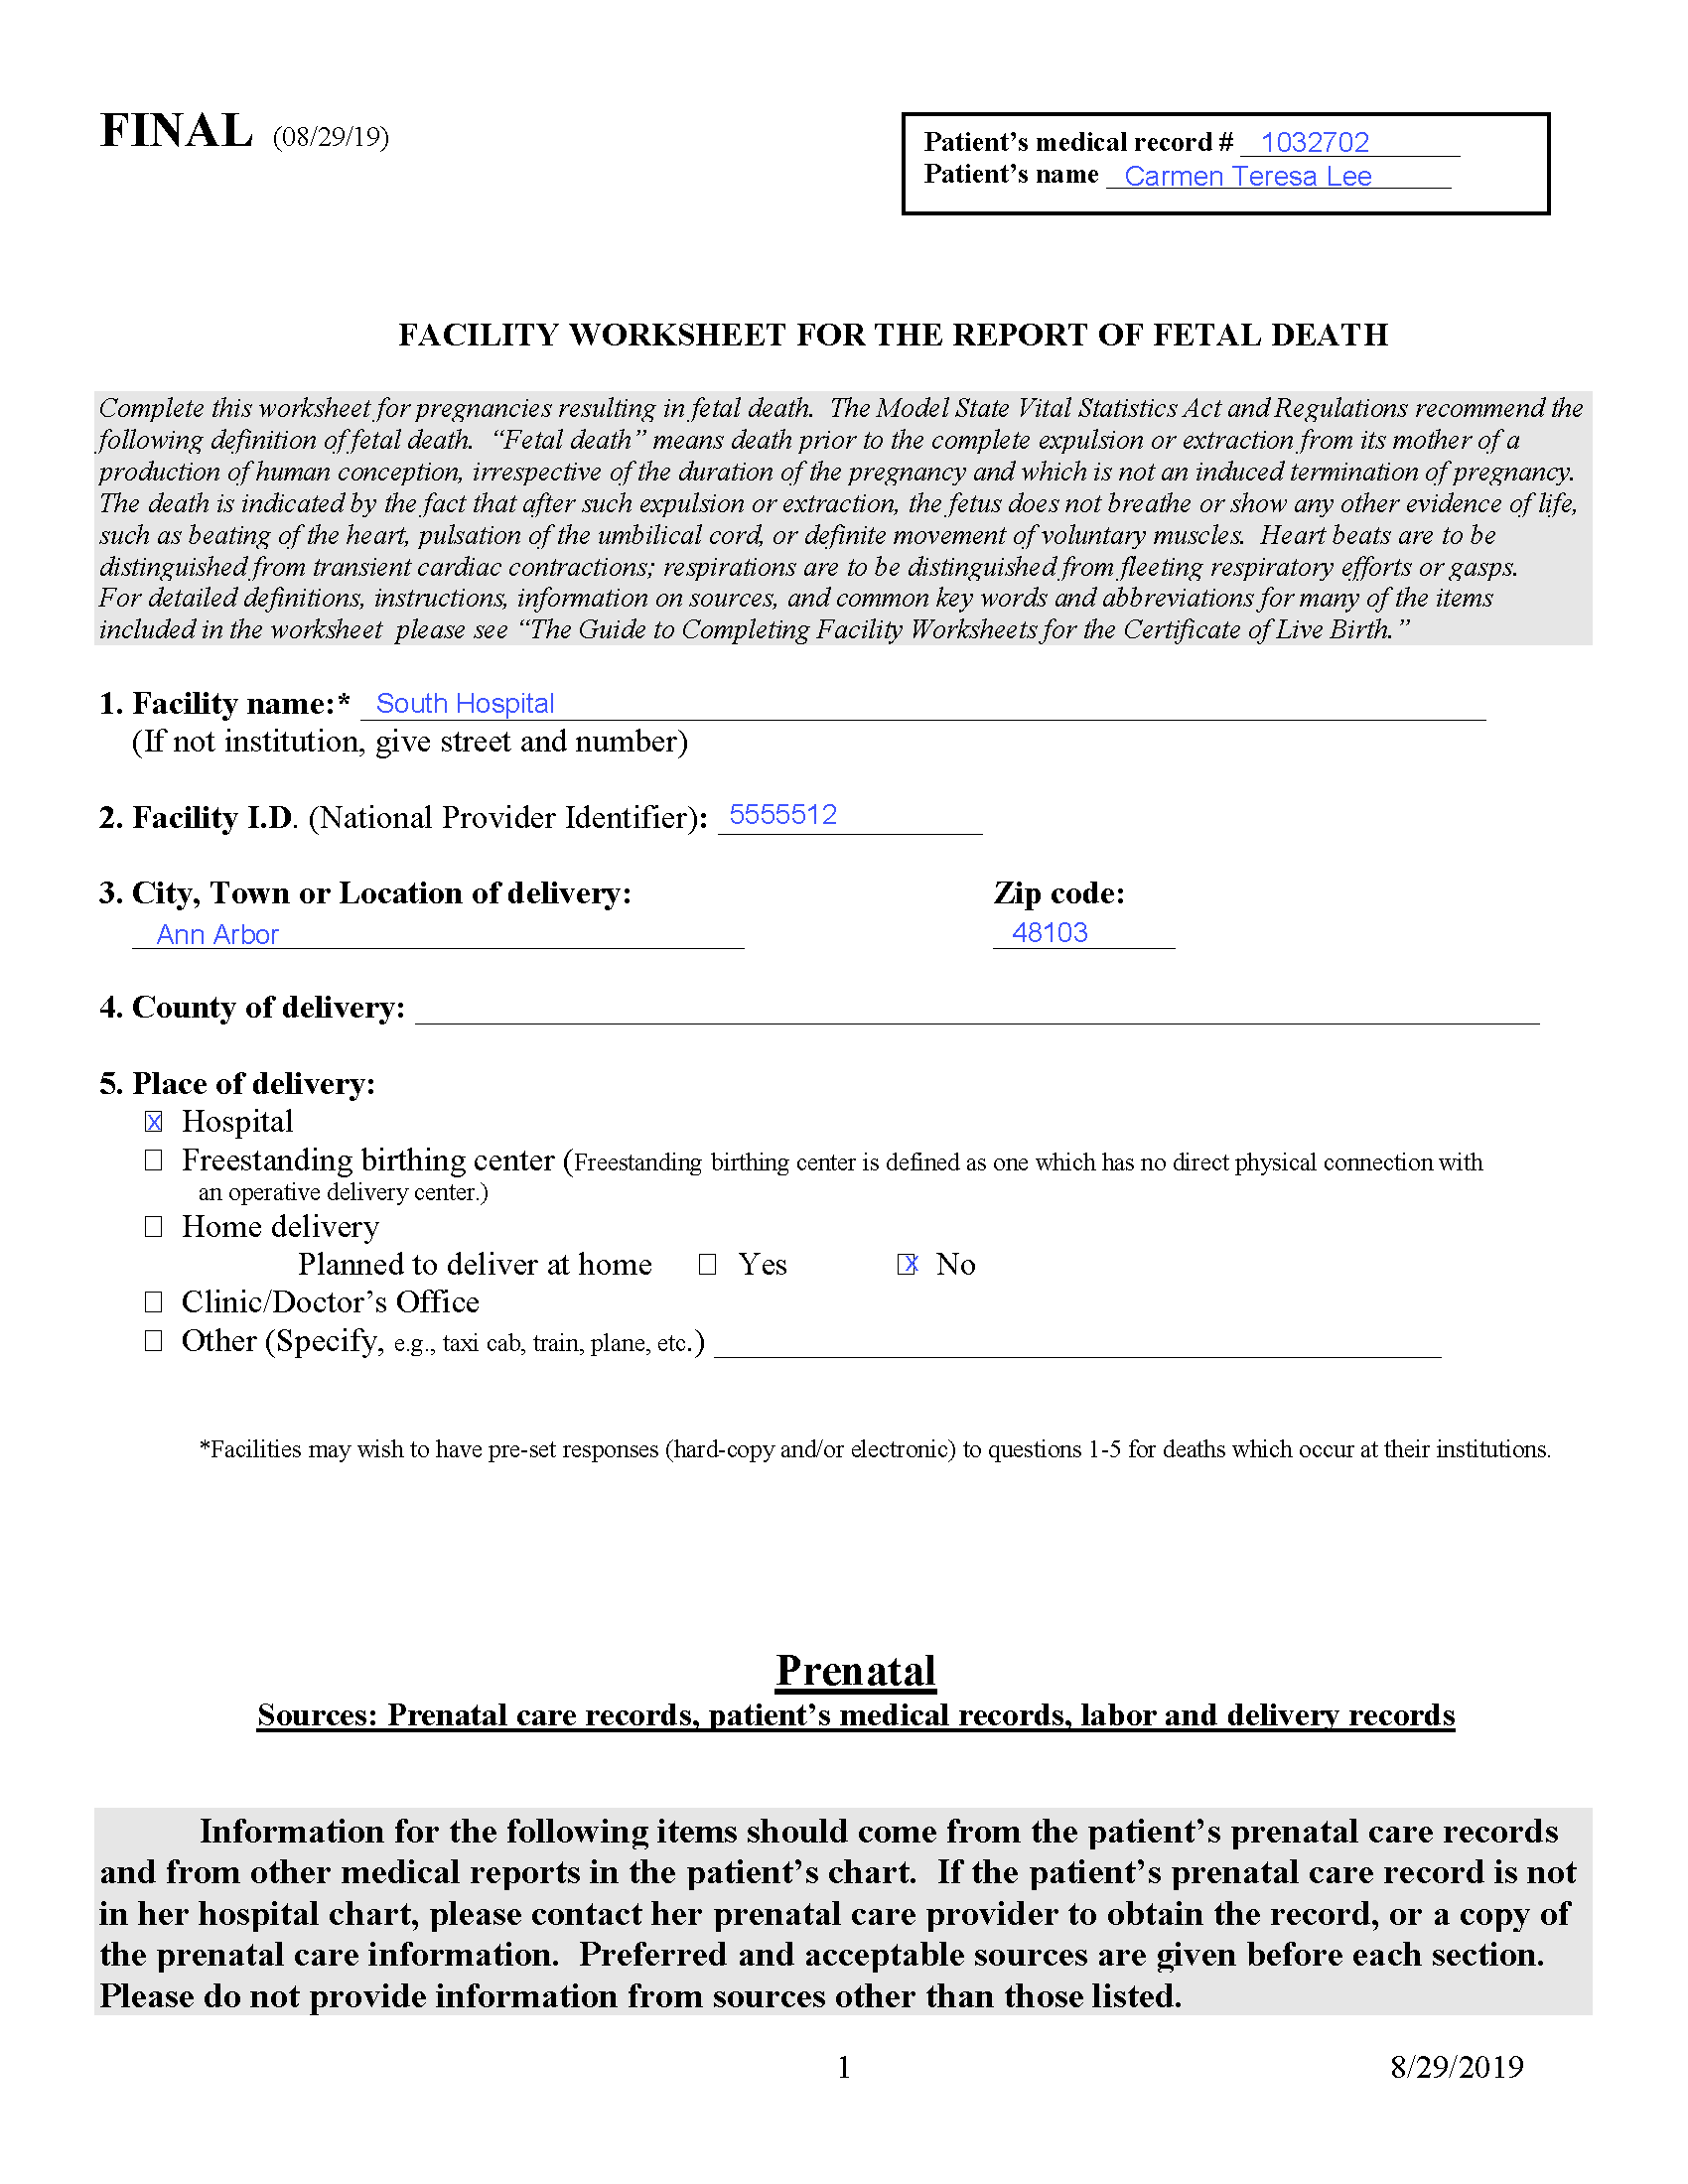 Example Facility Worksheet for Fetal Death Report - p1